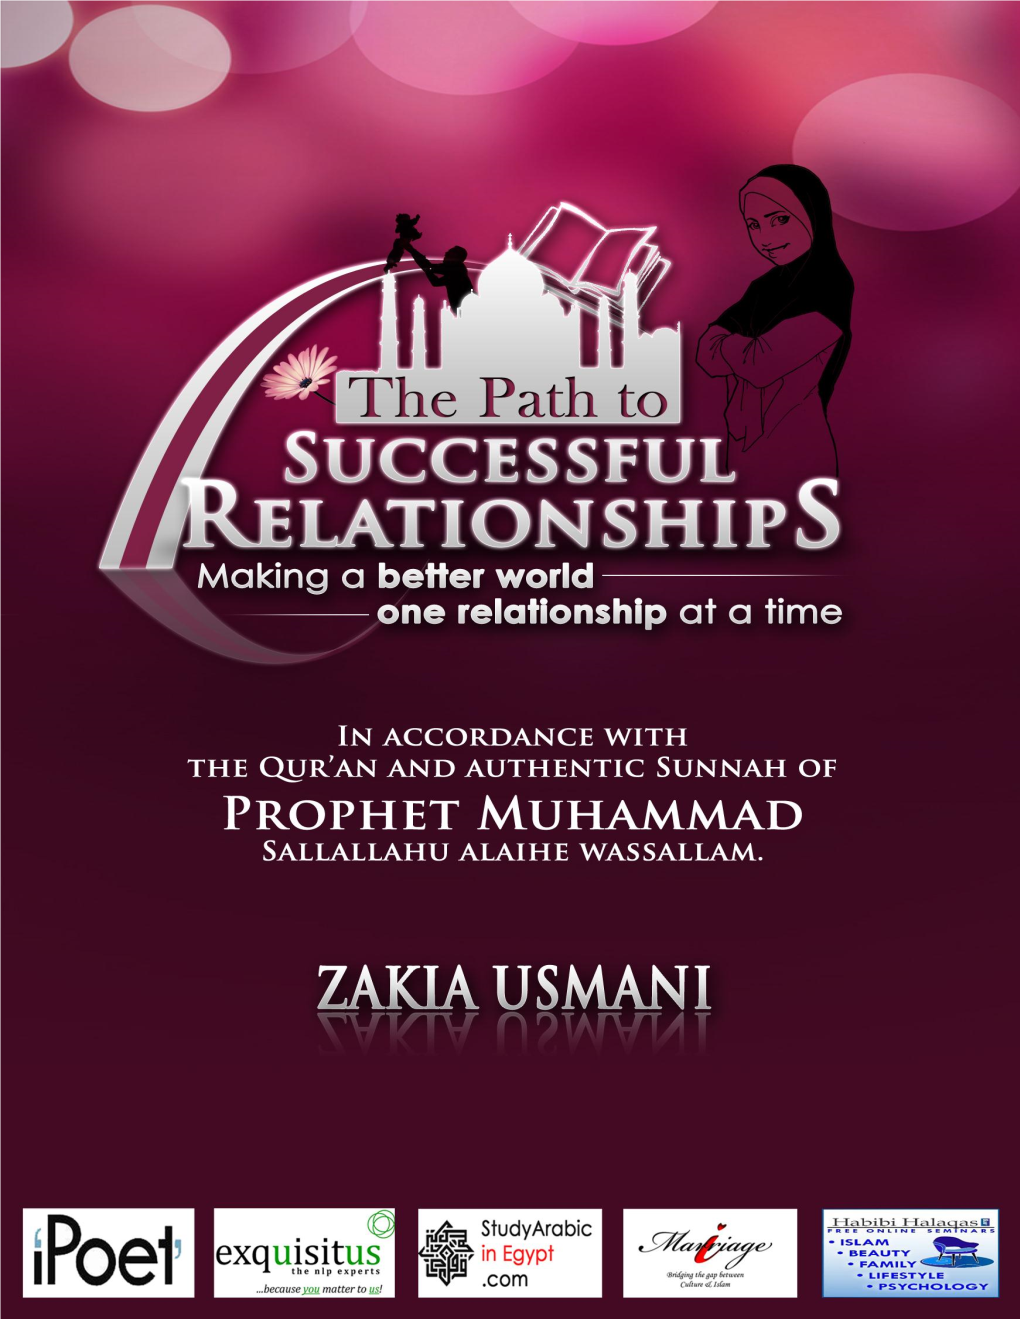 Your Relationship with Allah